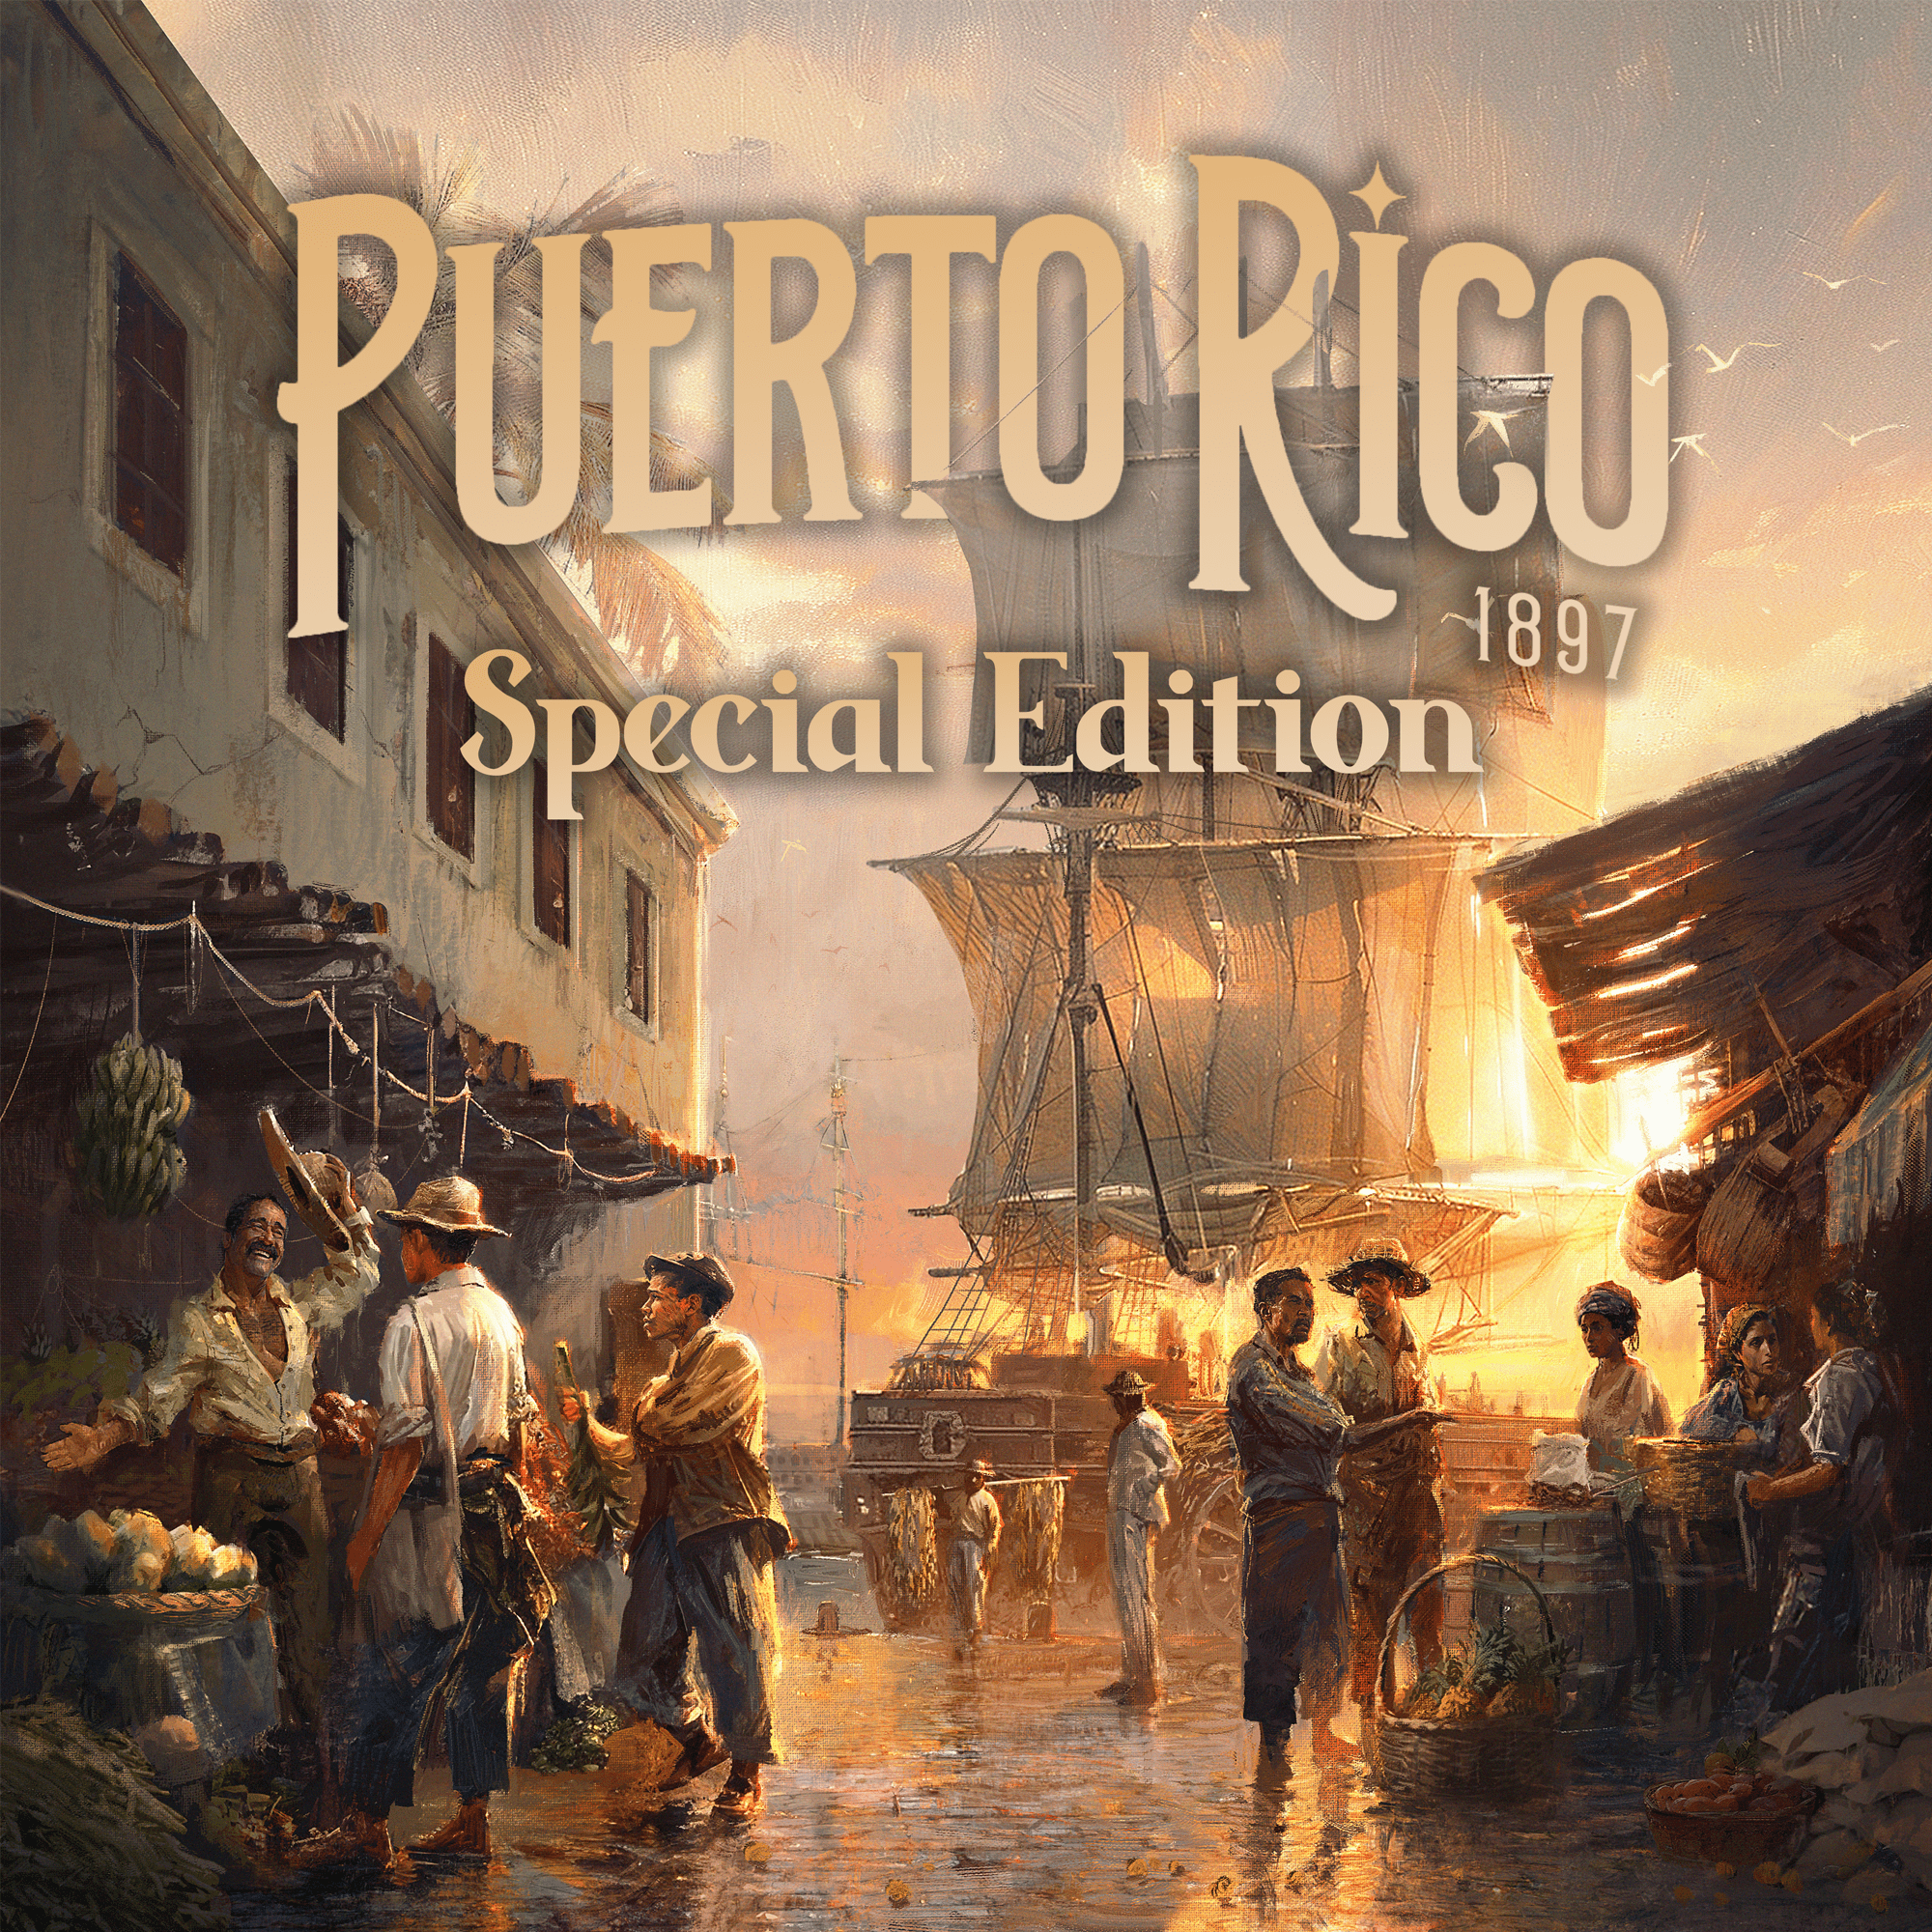 Puerto Rico 1897 Special Edition Promo Art Pulled After AI Allegations